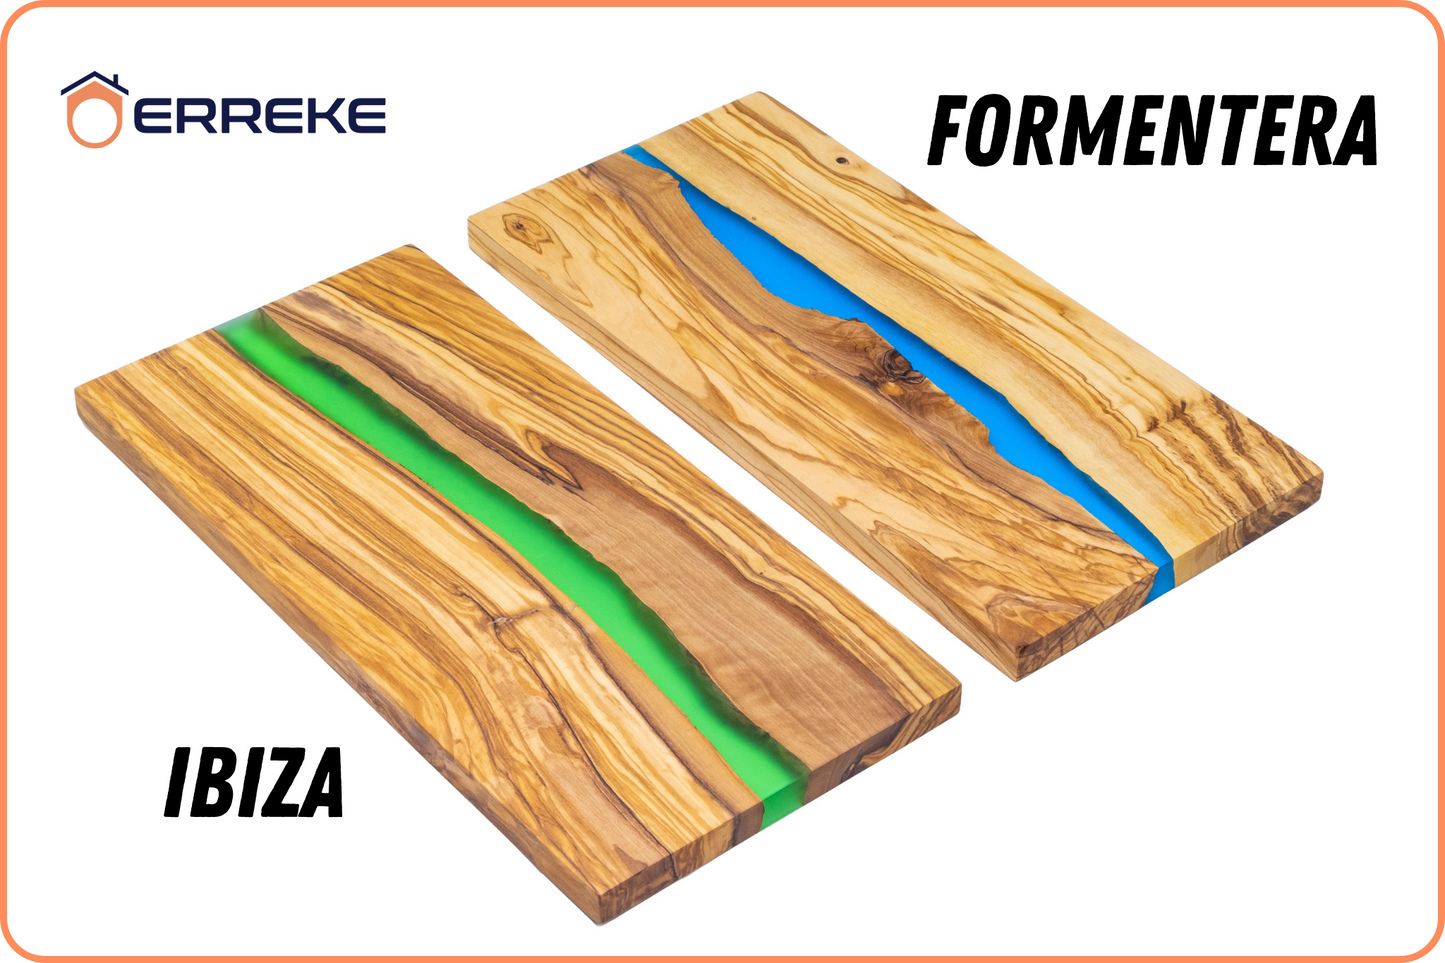 ERREKE Serving Board in Natural Olive Wood and Epoxy Resin IBIZA, Kitchen Chopping Board 38x18x1.5 cm, Ideal for Serving Sausages Ham Cheese Bread (Green)